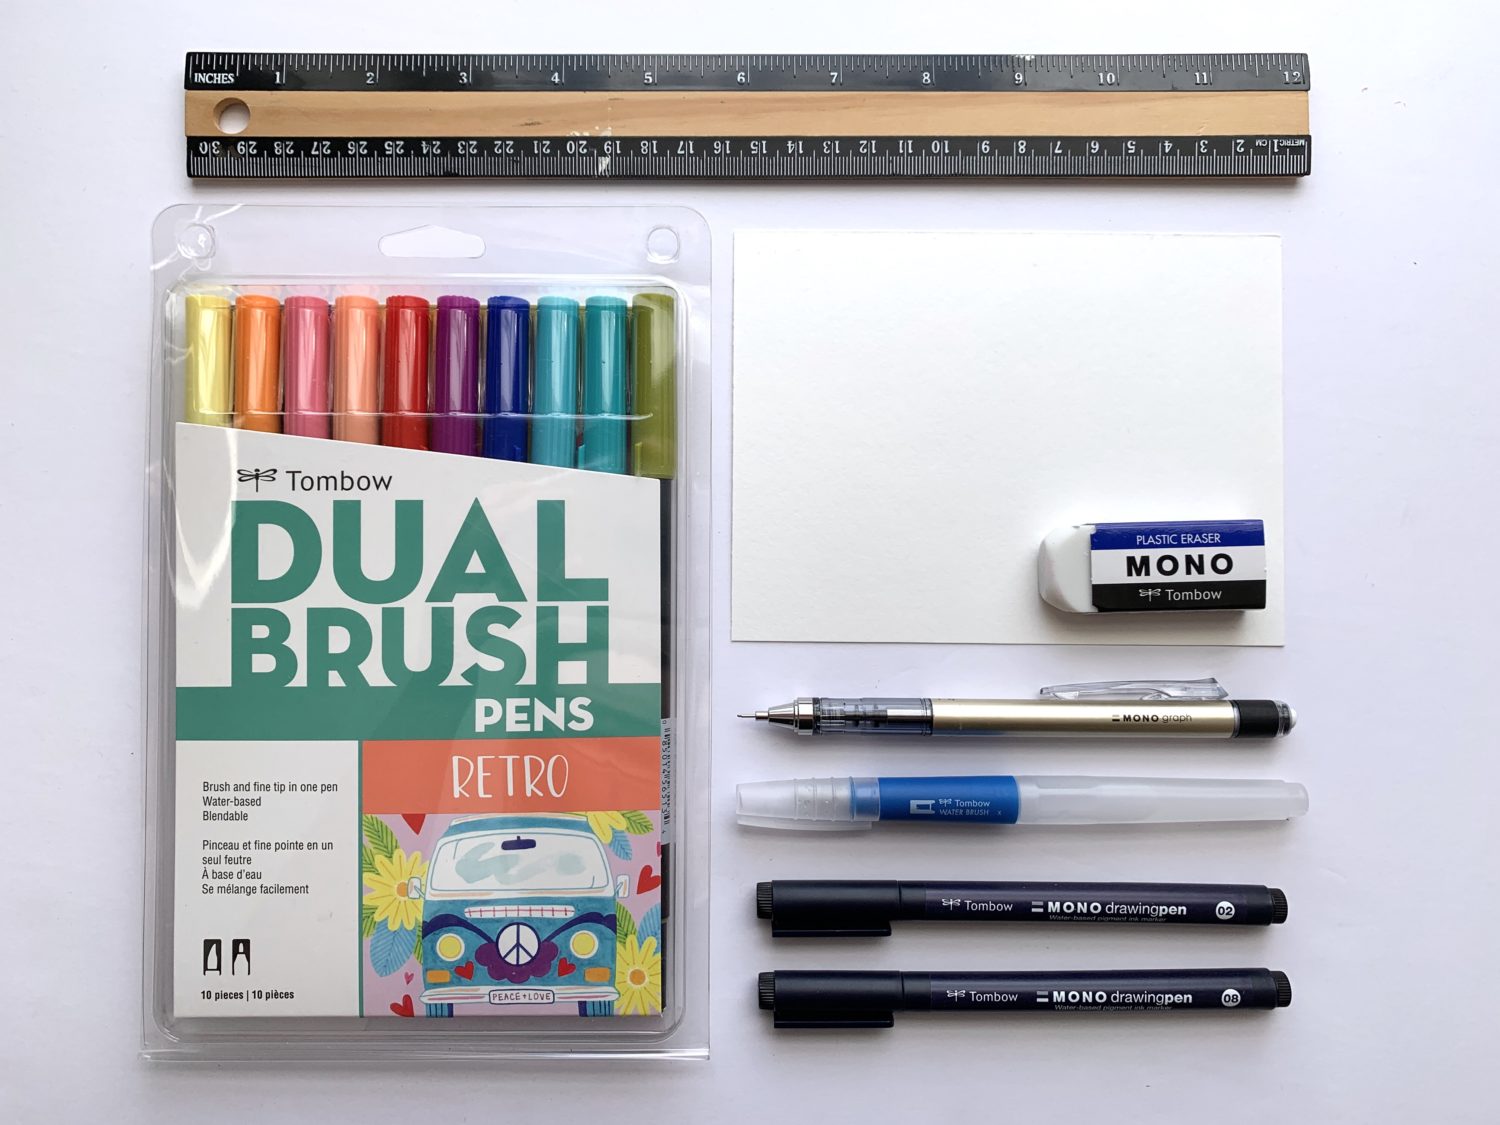 Simple, easy art project using @TombowUSA products! Tutorial by @AliLePere. #sharingartmatters #watercolor